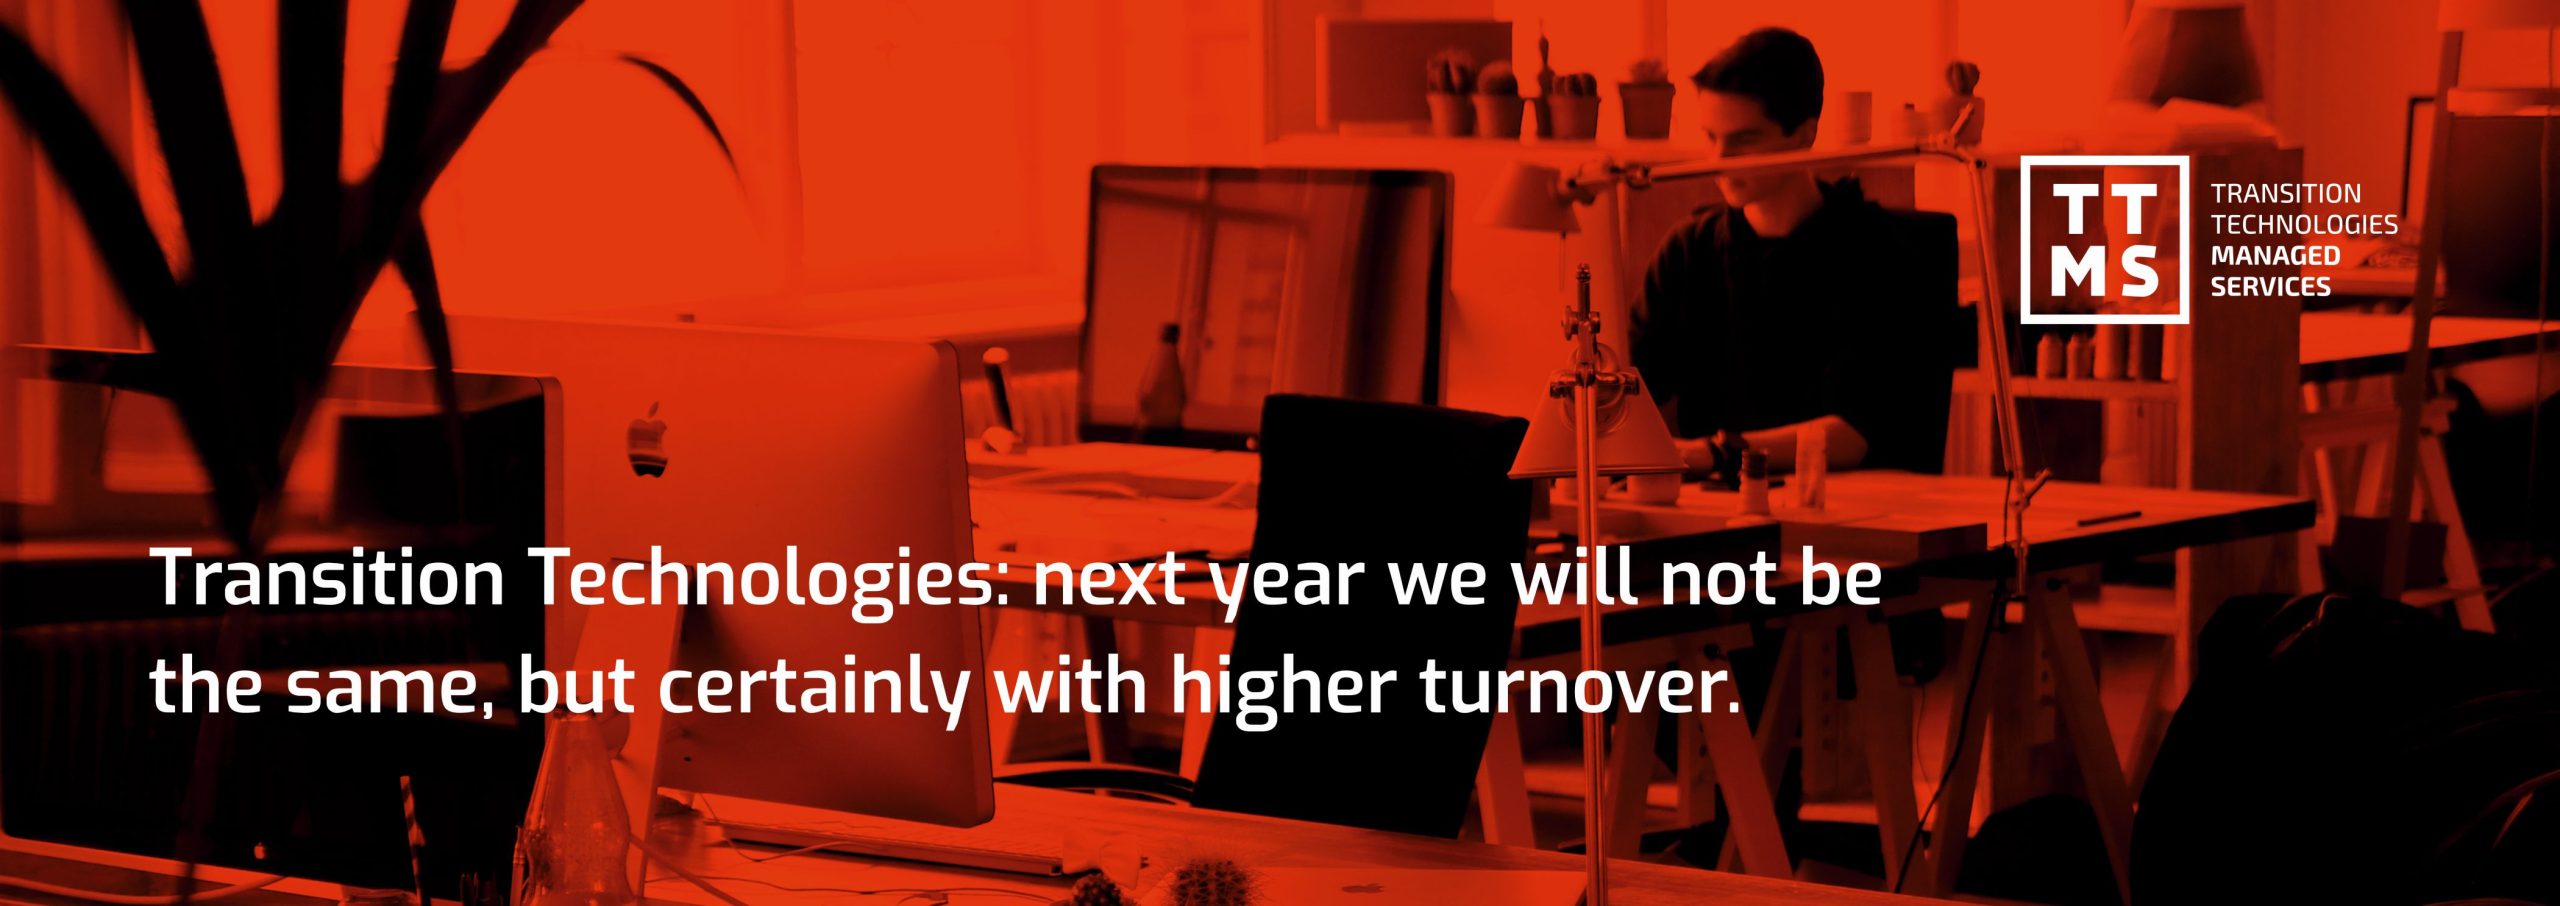 Transition Technologies: next year we will not be the same, but certainly with a higher turnover.